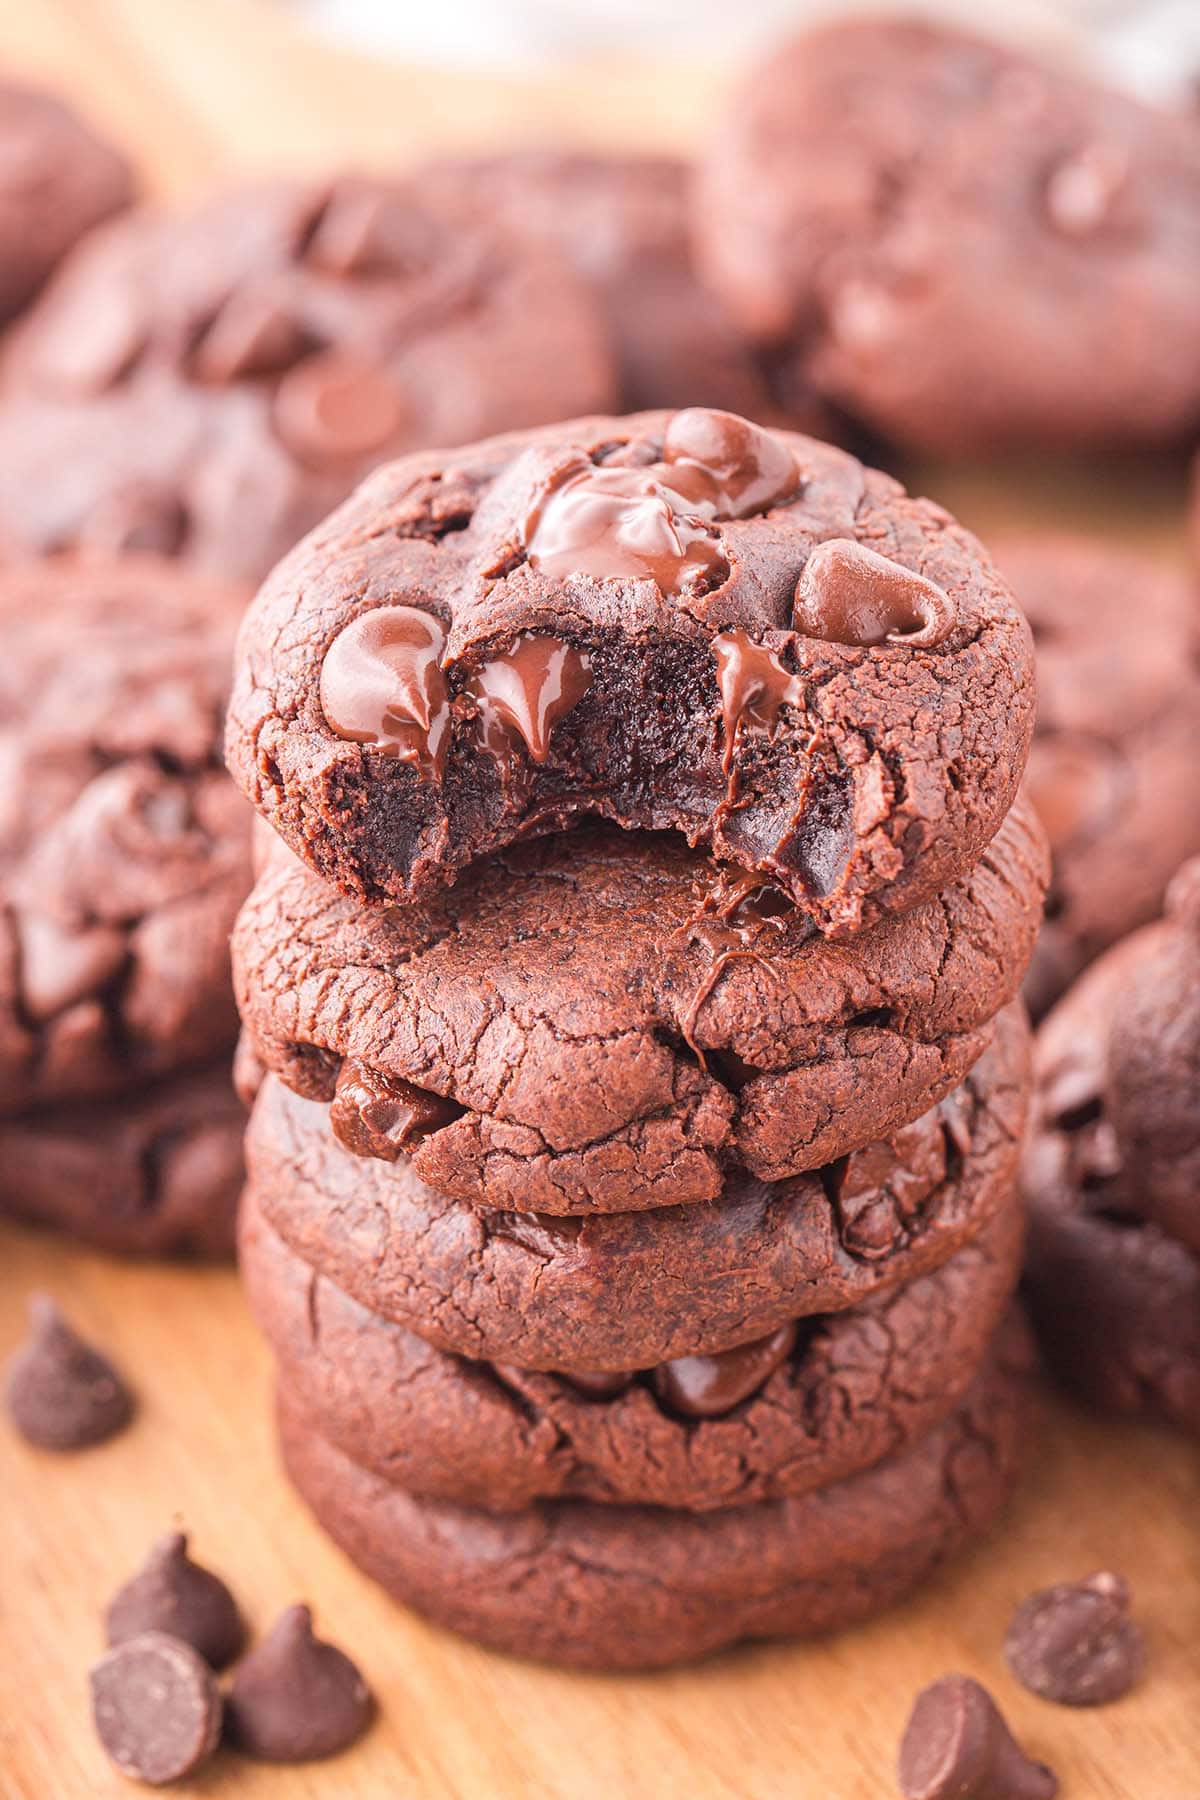 a couple of Brownie Mix Cookies on the table.